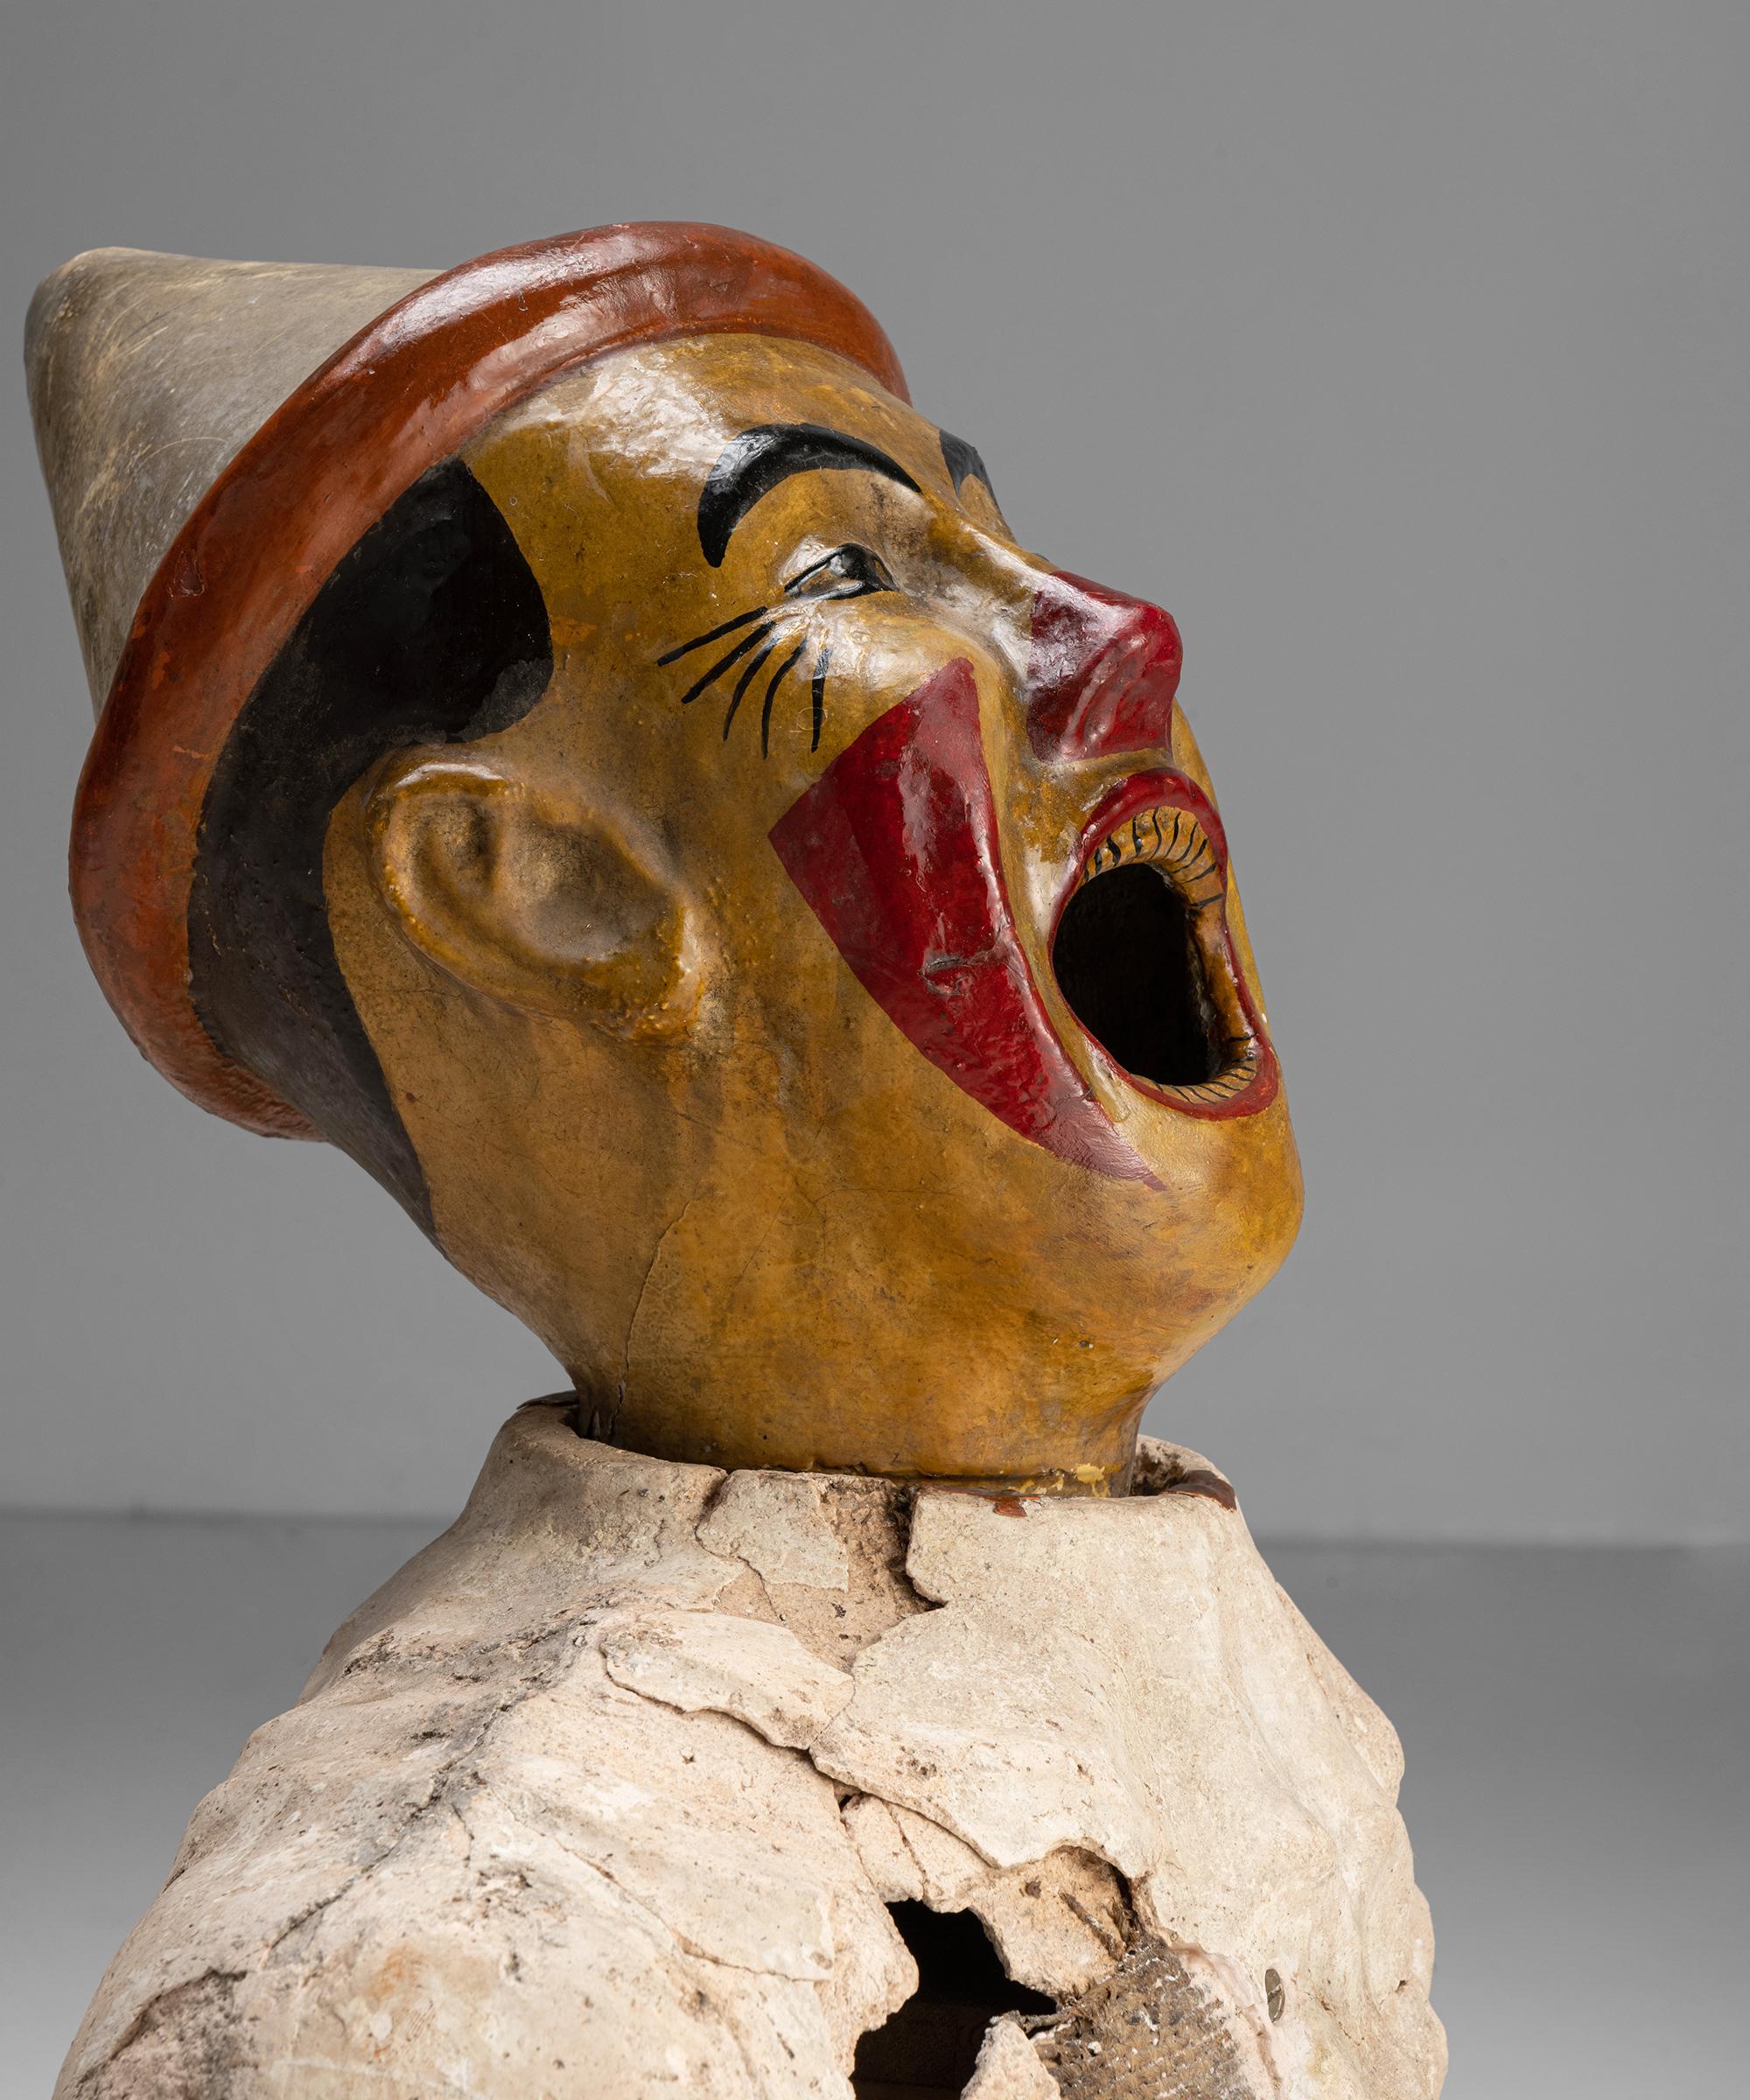 Fairground ball-toss game 

England Circa 1910

Laughing clown in painted plaster and hessian with cast iron inner piping.

Measures: 22.5” W x 9.25” D x 26.5” H.